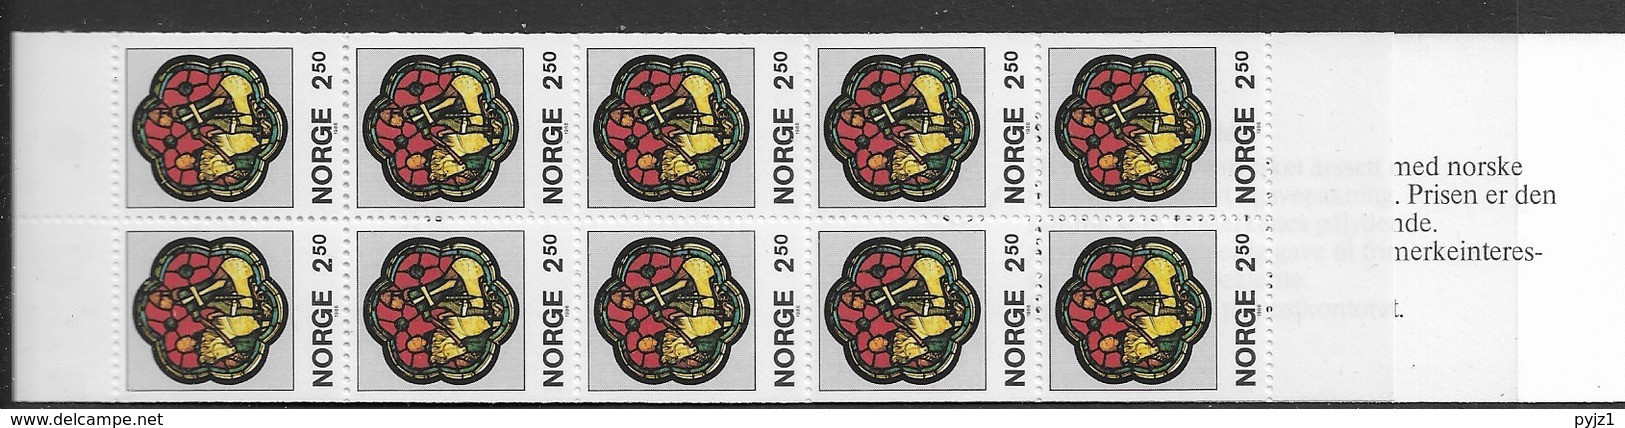 1986 MNH Norway, Booklet, Mi 959, Lower Margin Imperforate - Booklets